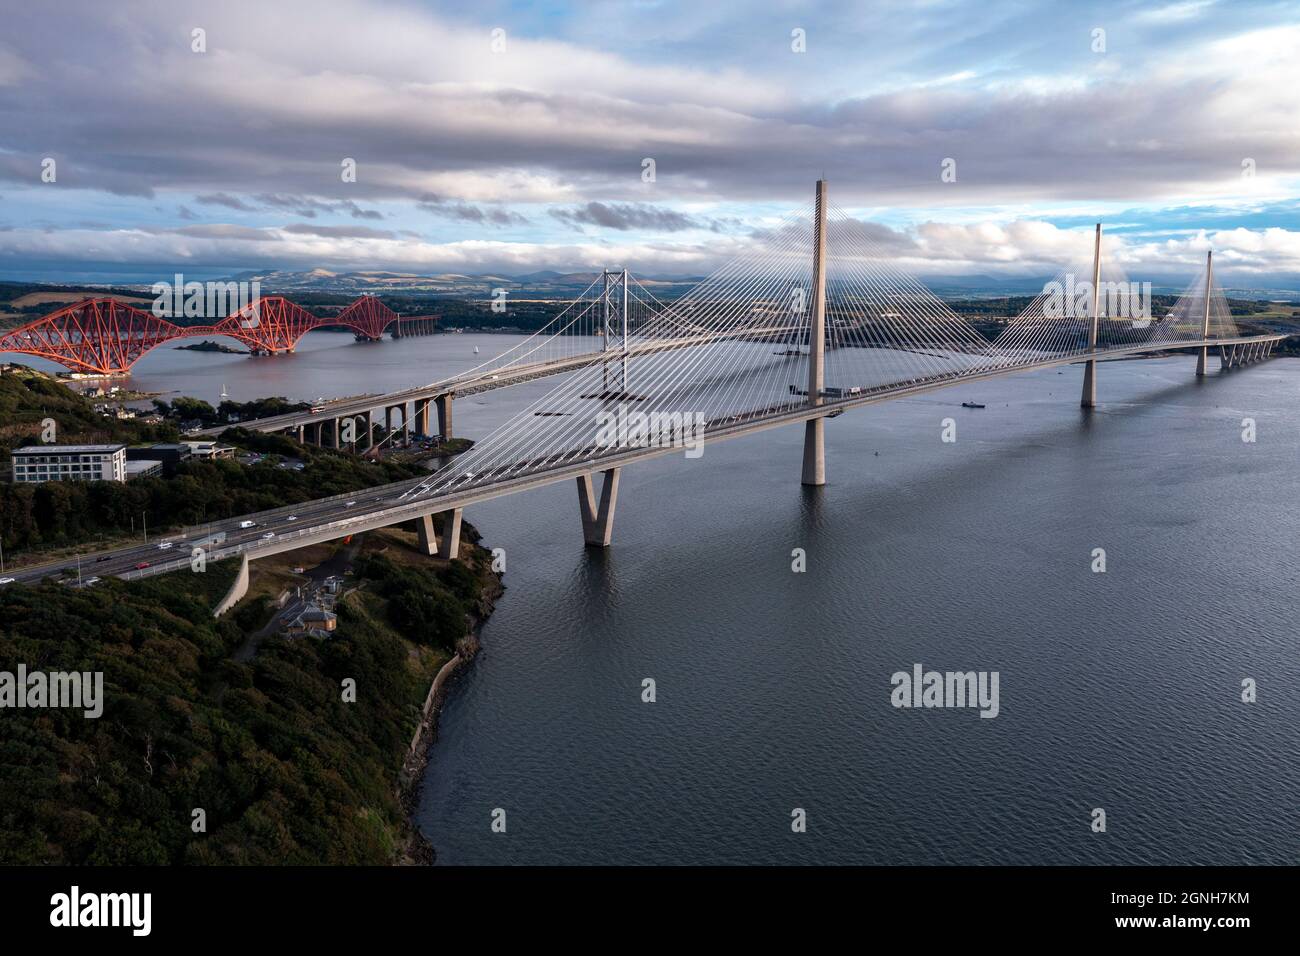 North Queensferry, Eaglesham, Scotland, UK. 25th Sep, 2021. PICTURED: Aerial drone view of Forth bridges. Spanning three centuries in bridge design and connecting two of Scotland's counties of Fife and Lothian, the Queensferry Crossing Scotland's newest bridge designed to look like sails on a ship, connects North Queensferry to South Queensferry, with Forth Road Bridge behind showcasing mid 20th century technology and background Forth Rail Bridge late 1800s with its cantilever construction. Credit: Colin Fisher/Alamy Live News Stock Photo